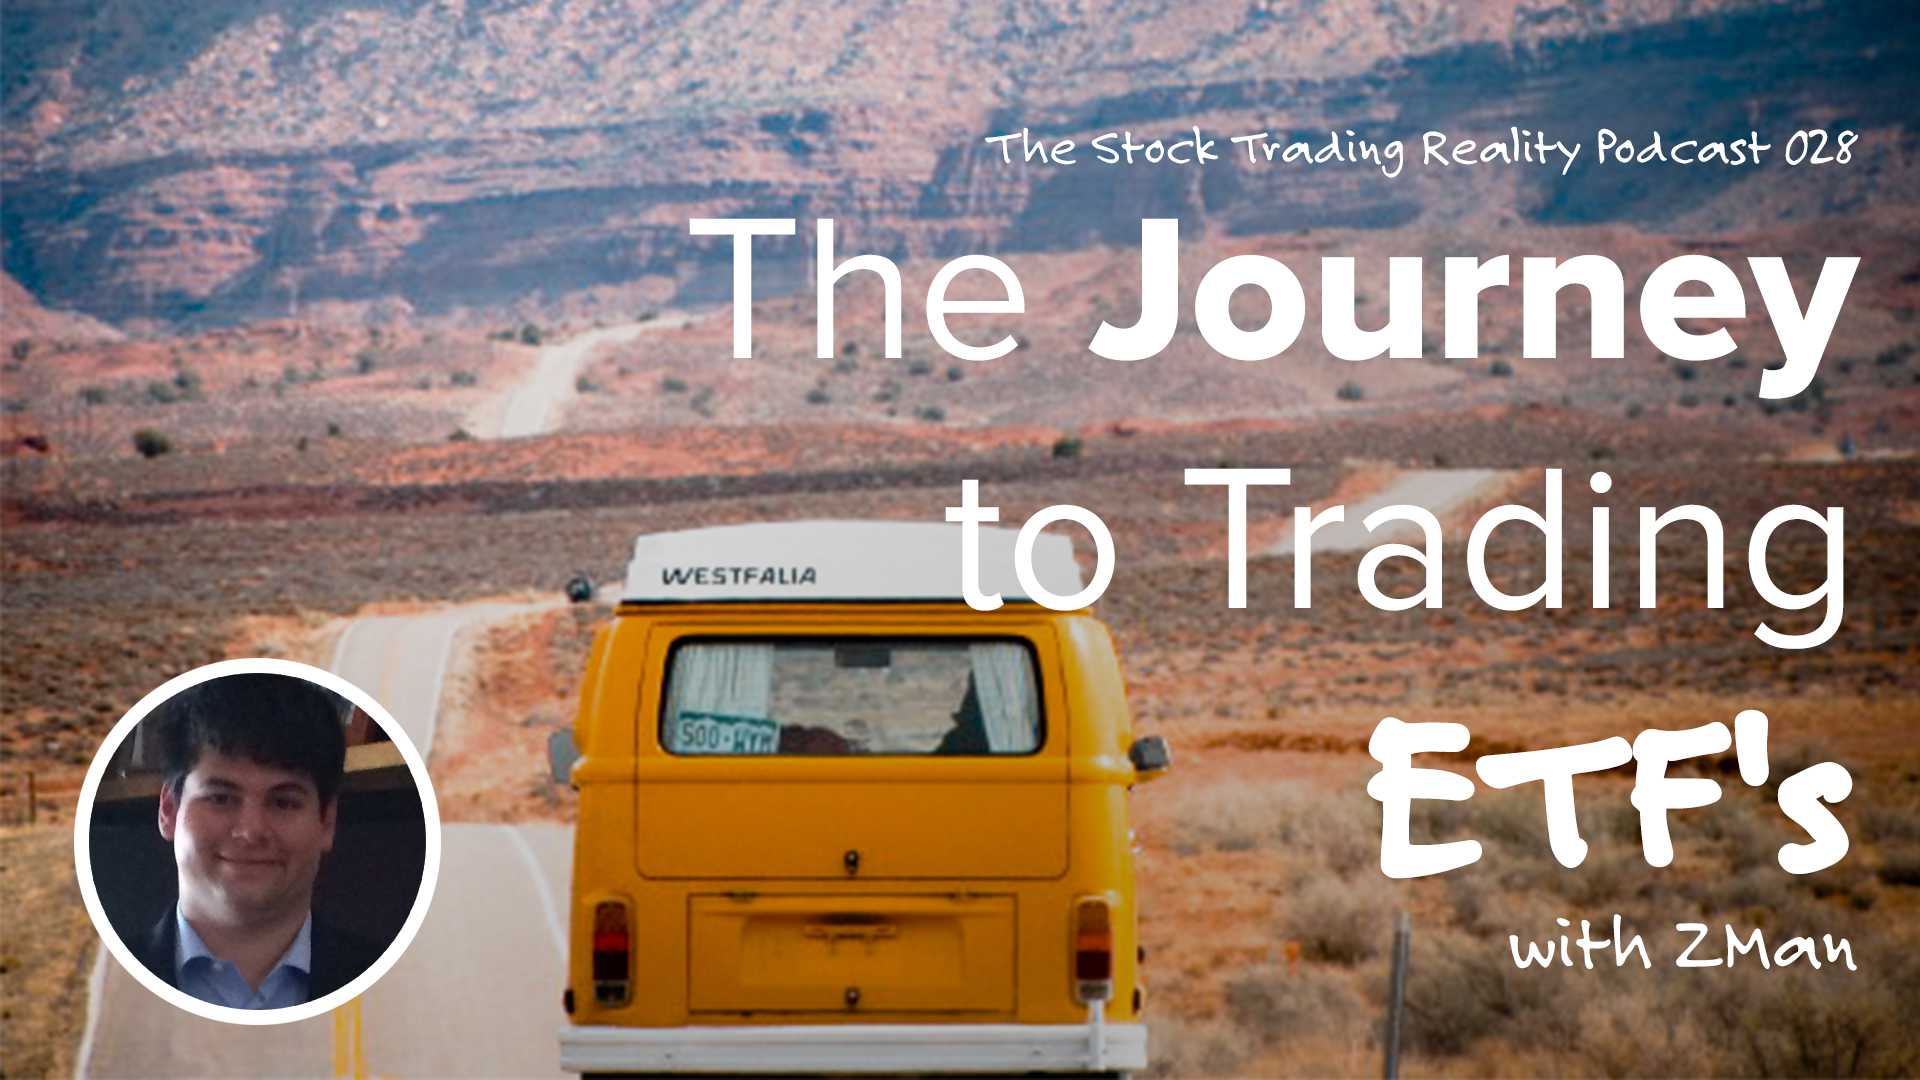 STR 028: The Journey to Trading ETF's